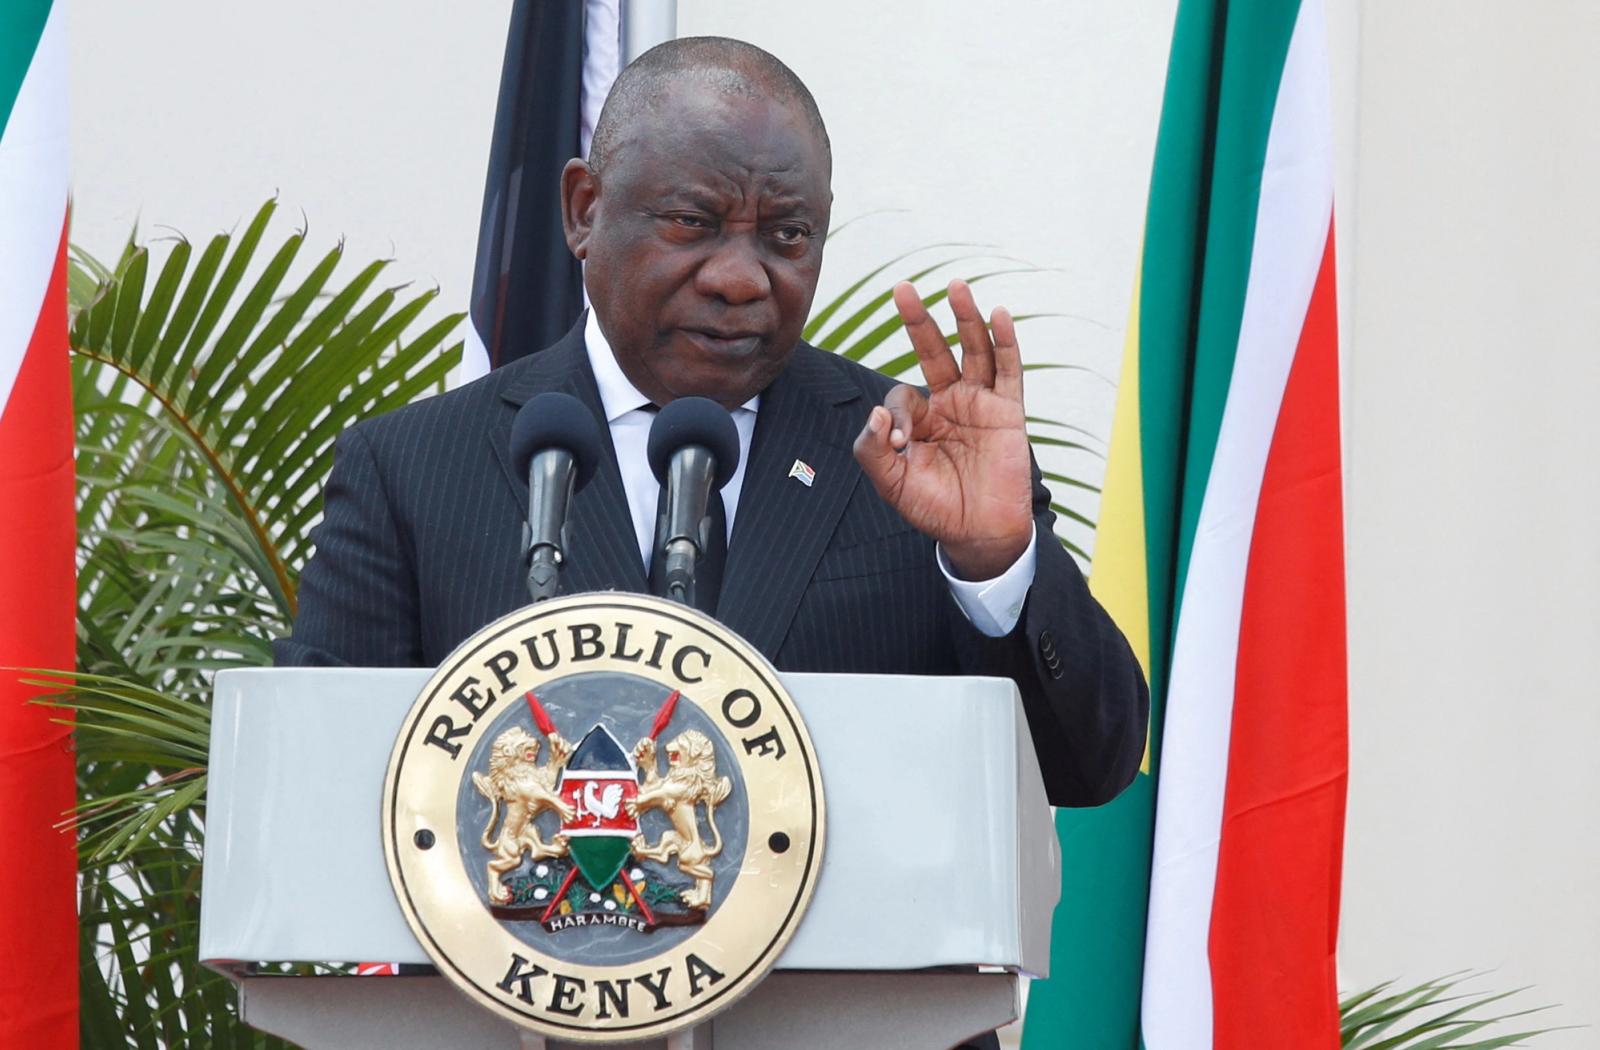 South African President Cyril Ramaphosa addresses a joint news conference with his Kenyan counterpart William Ruto, after holding bilateral talks during his visit at State House in Nairobi, Kenya November 9, 2022. 